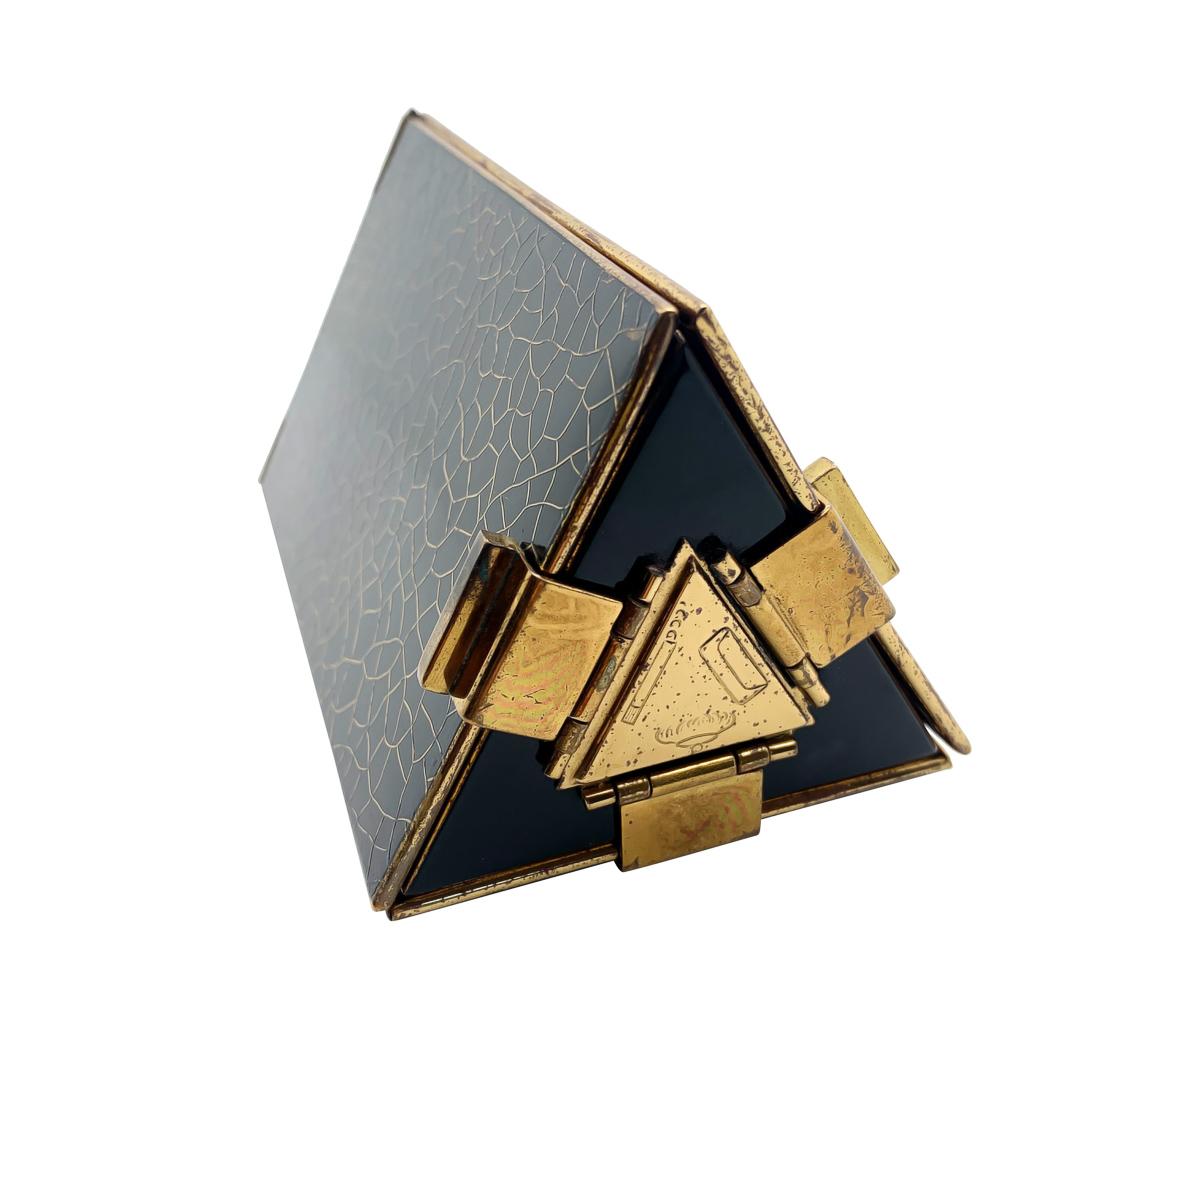 A rare and exceptional Art Deco Triangular Prism Minaudiere from the 1930s. Featuring a glorious amount of detail. Including a section for make up, cigarettes and notes/dance card. The base panel beautifully embellished with engravings indicating